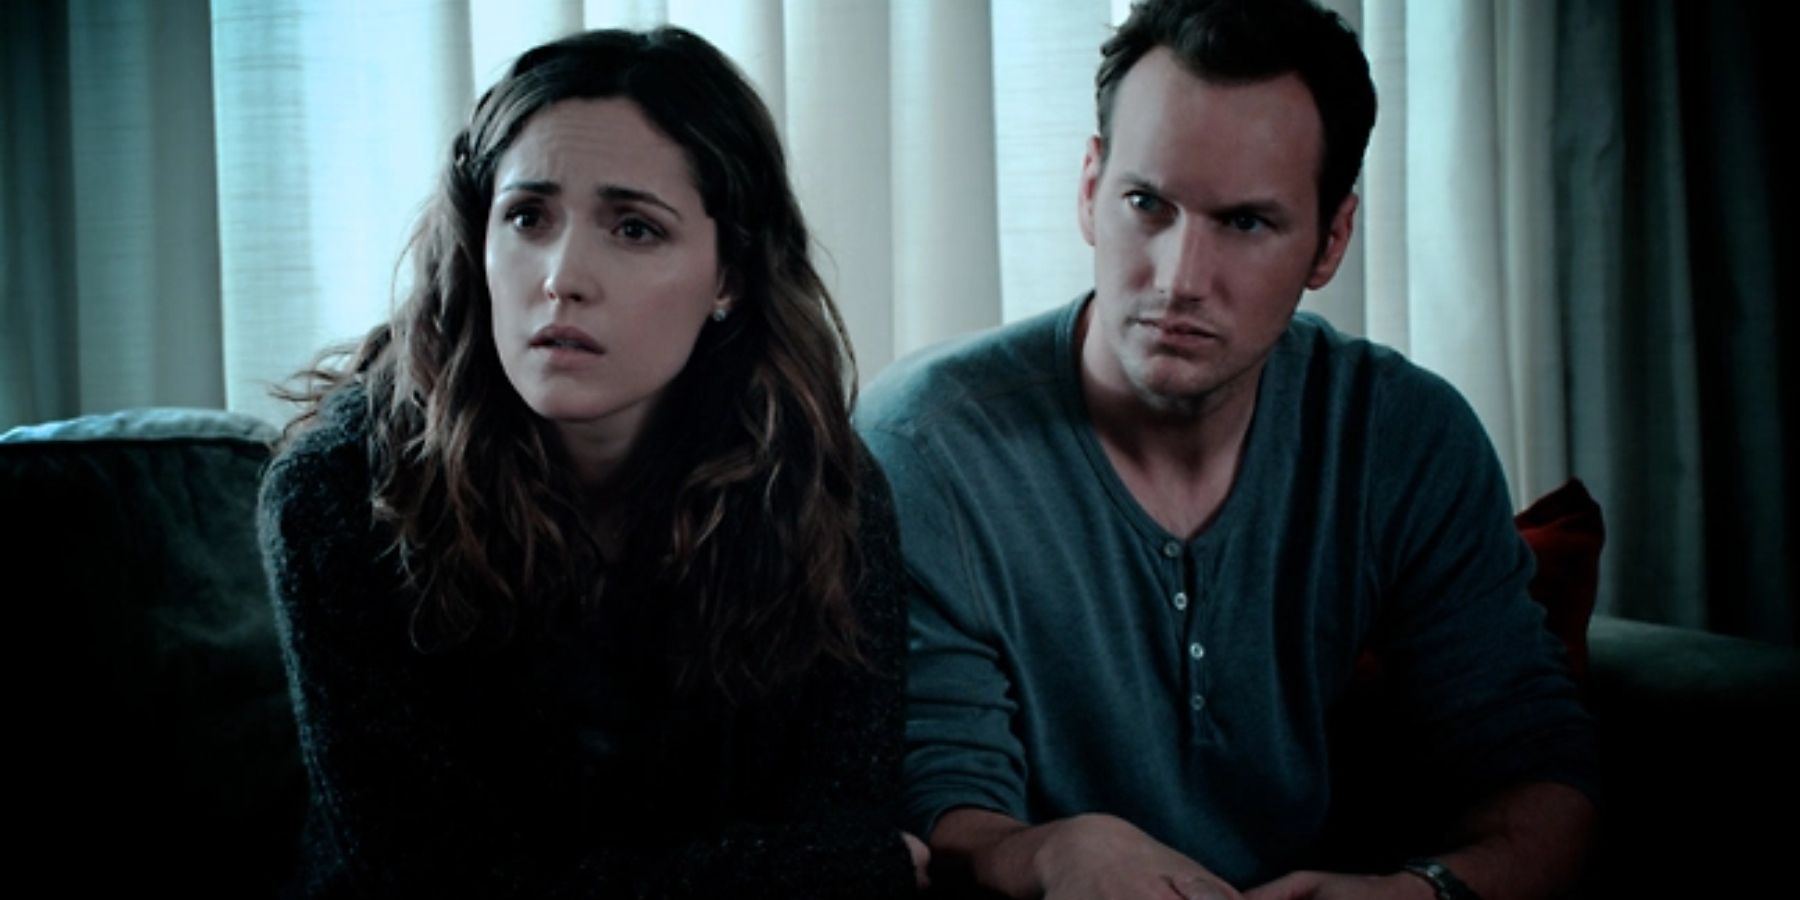 Rose Byrne as Rose and Patrick Wilson as Josh in Insidious